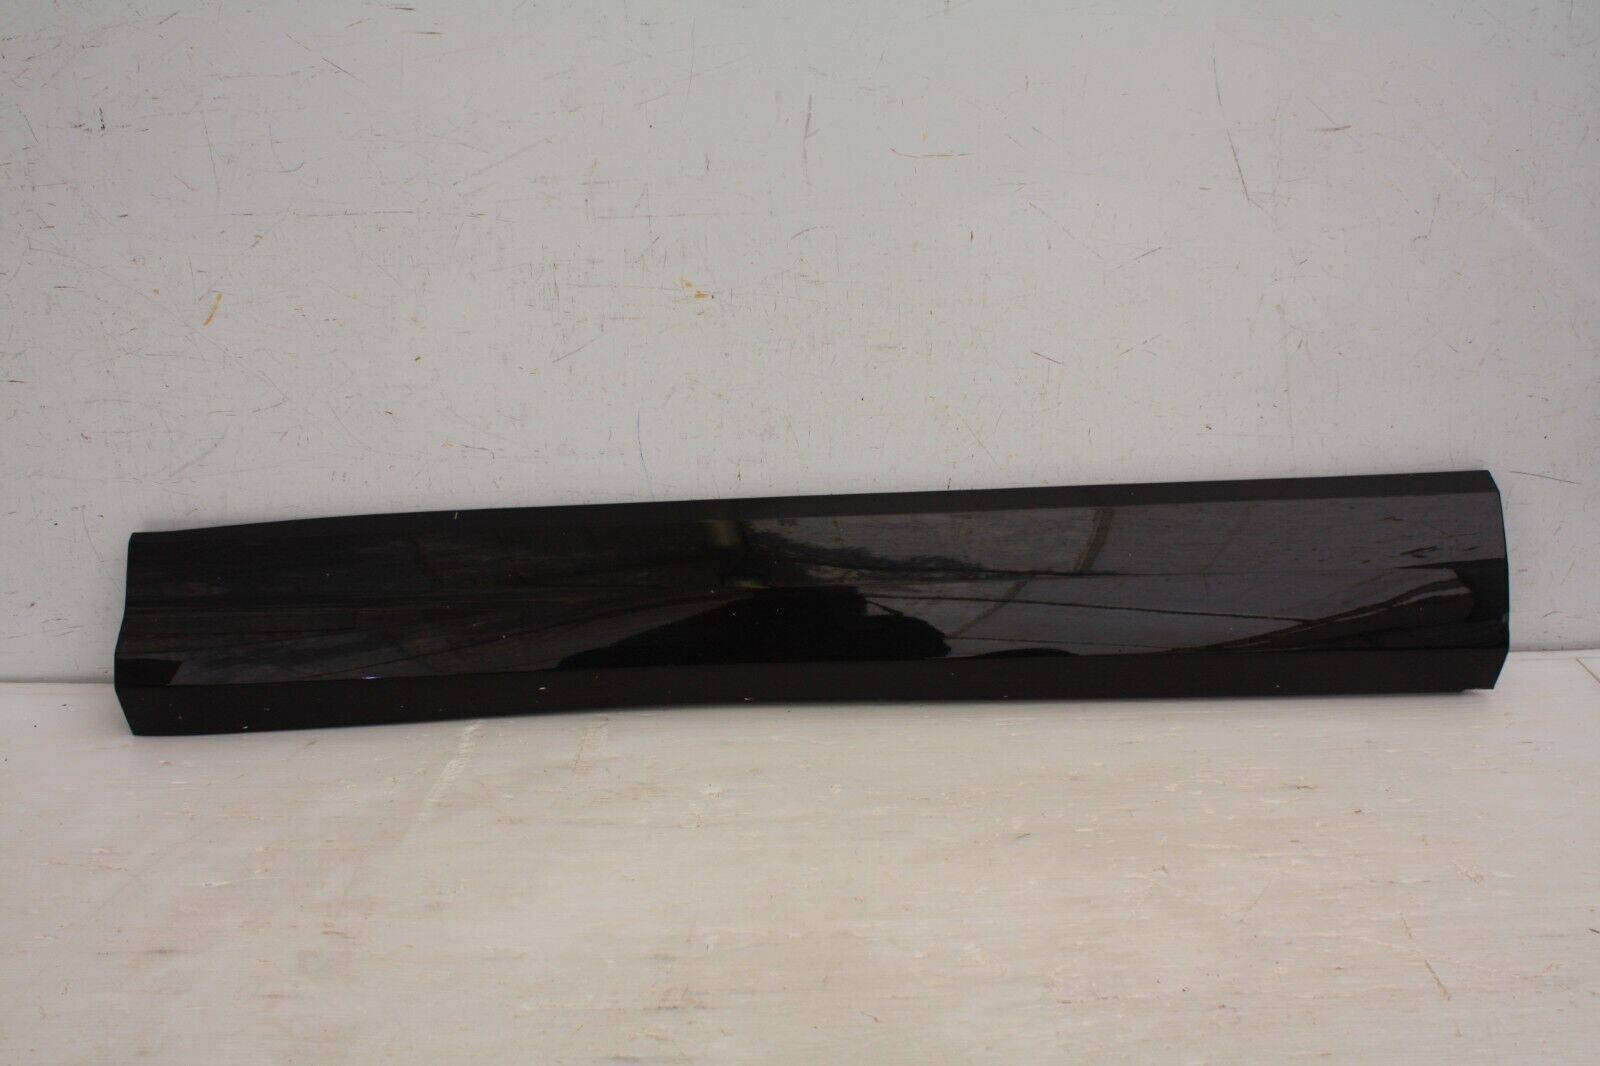 Audi Q3 S Line Front Left Door Moulding 2018 ON 83A853959A Genuine SEE PICS 175752575178